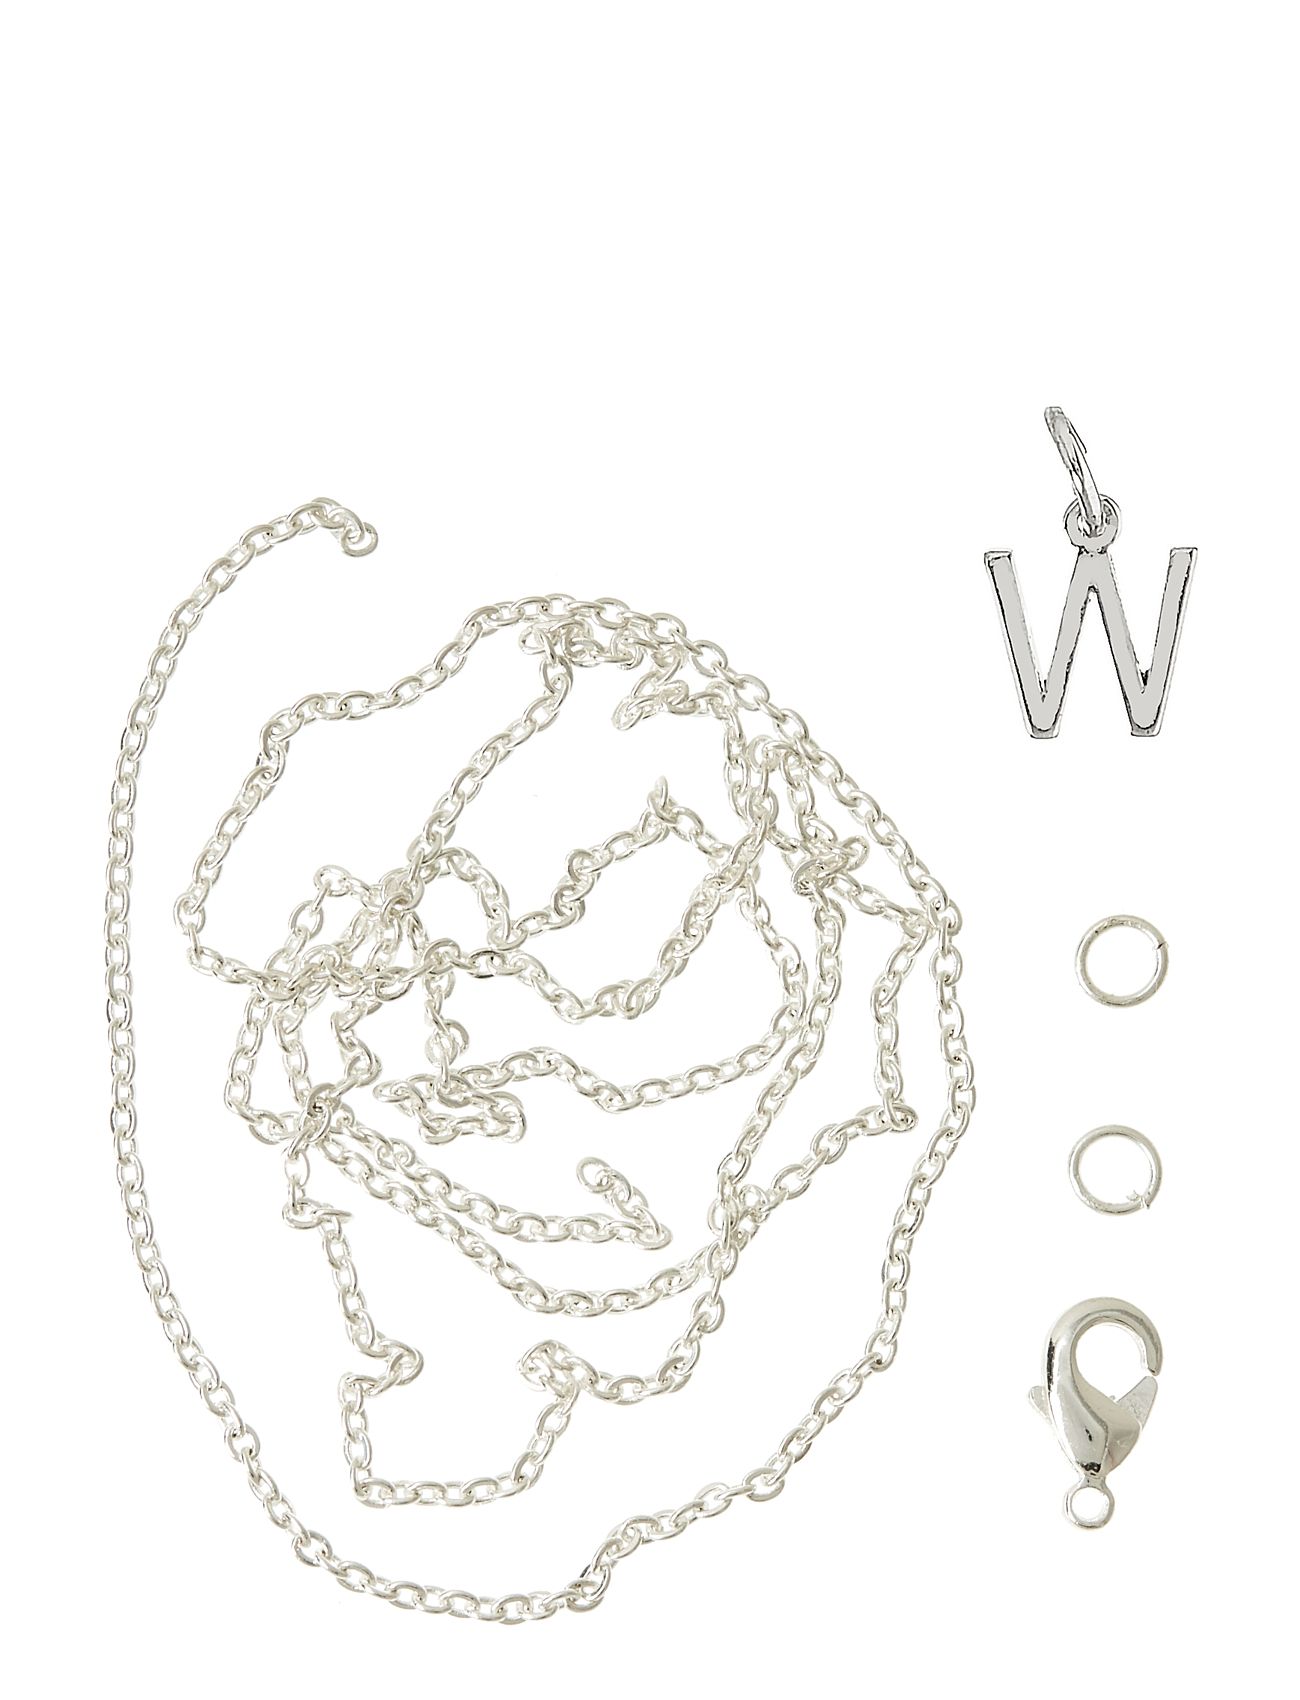 Letter W Sp With O-Ring, Chain And Clasp Toys Creativity Drawing & Crafts Craft Jewellery & Accessories Silver Me & My Box